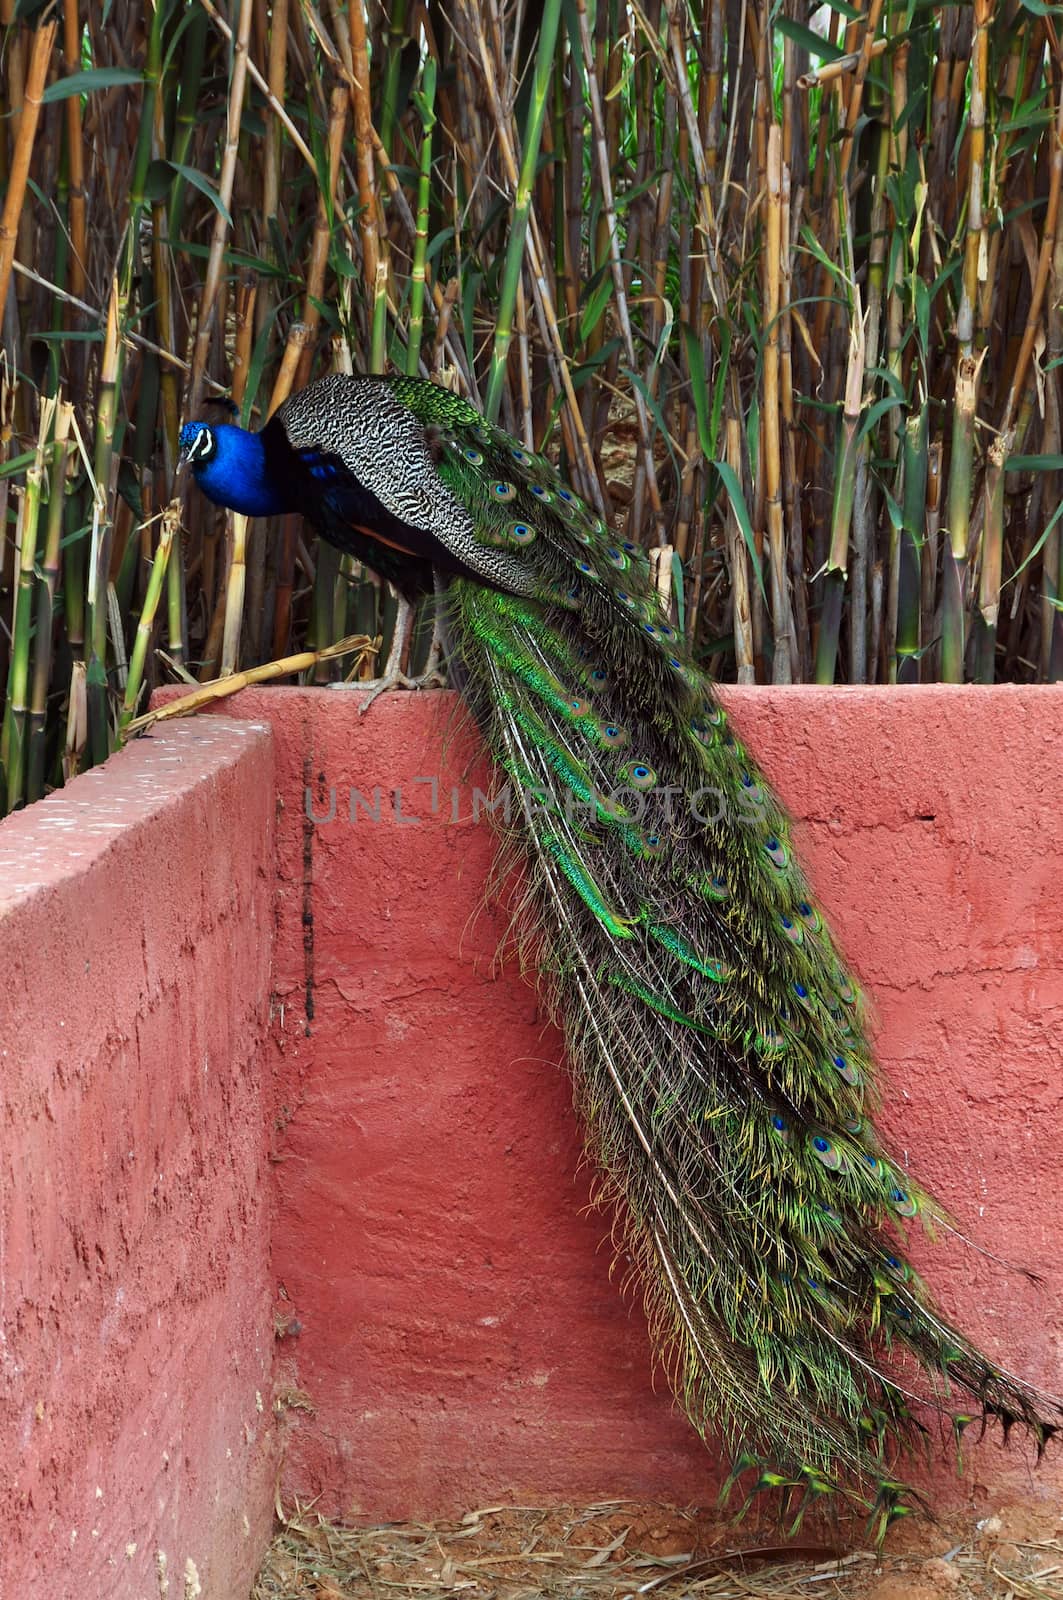 Peacock with long tail and colorful iridescent plumage. Bird sitting on wall.